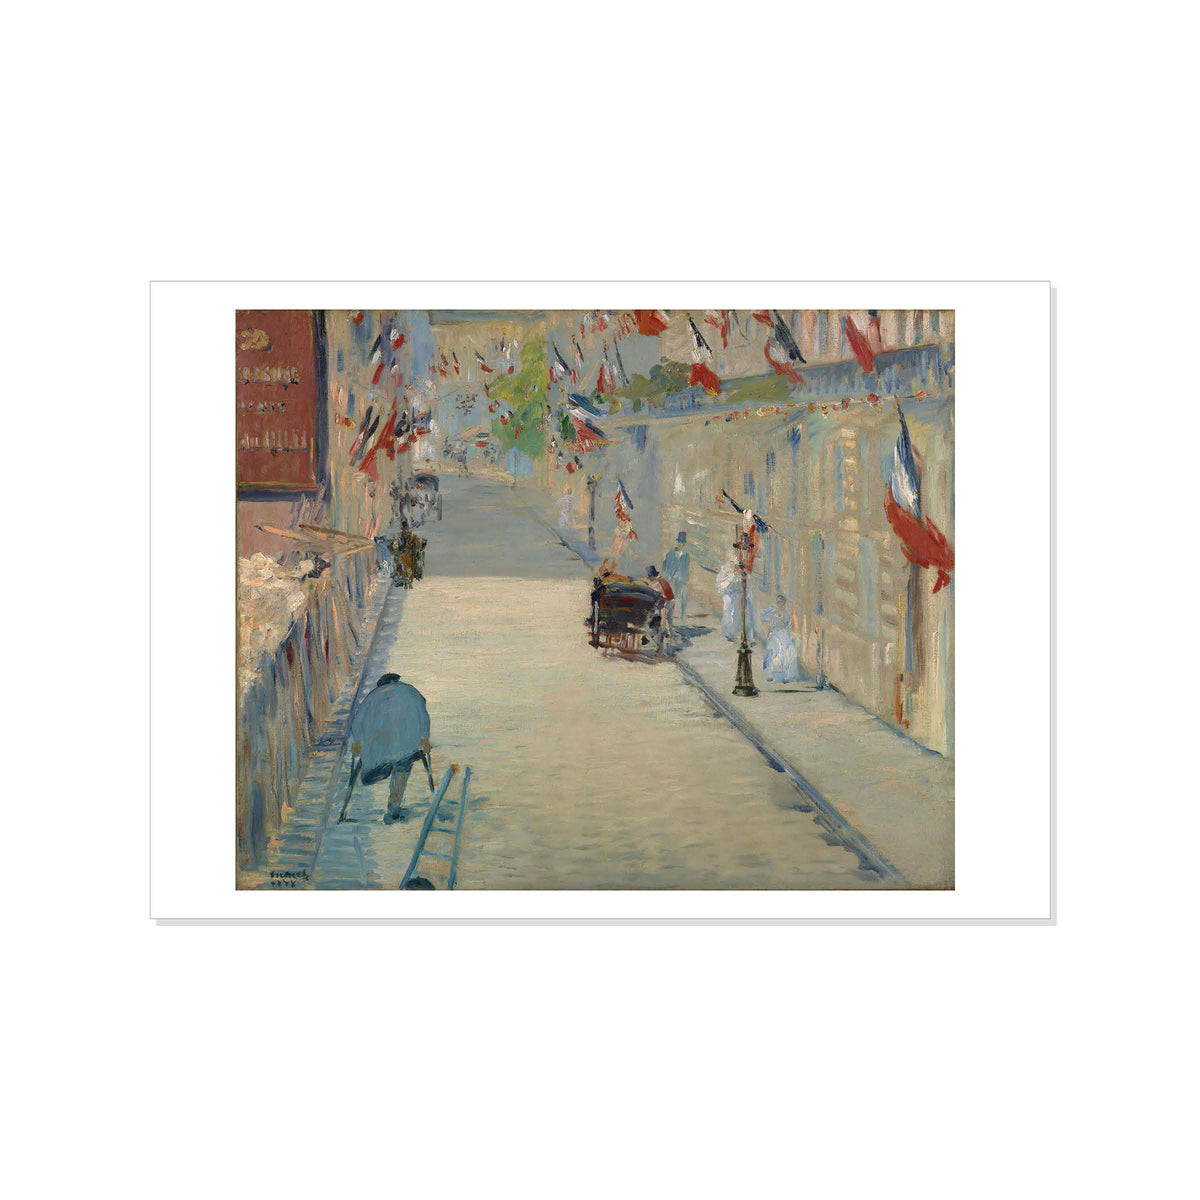 Manet - The Rue Mosnier with Flags - Postcard